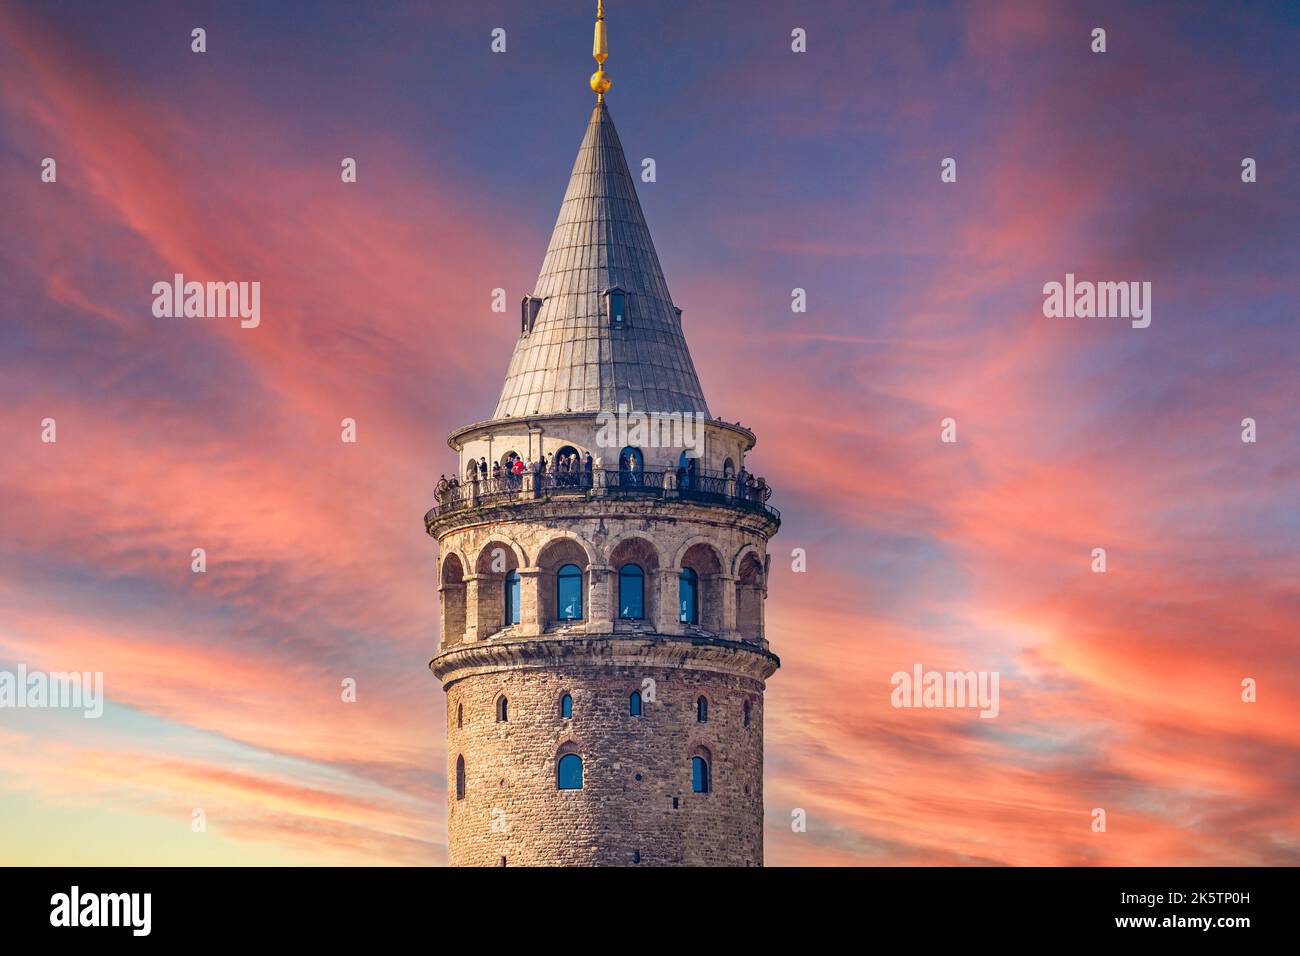 Sunset view of Galata tower in Istanbul, Turkey. Stock Photo